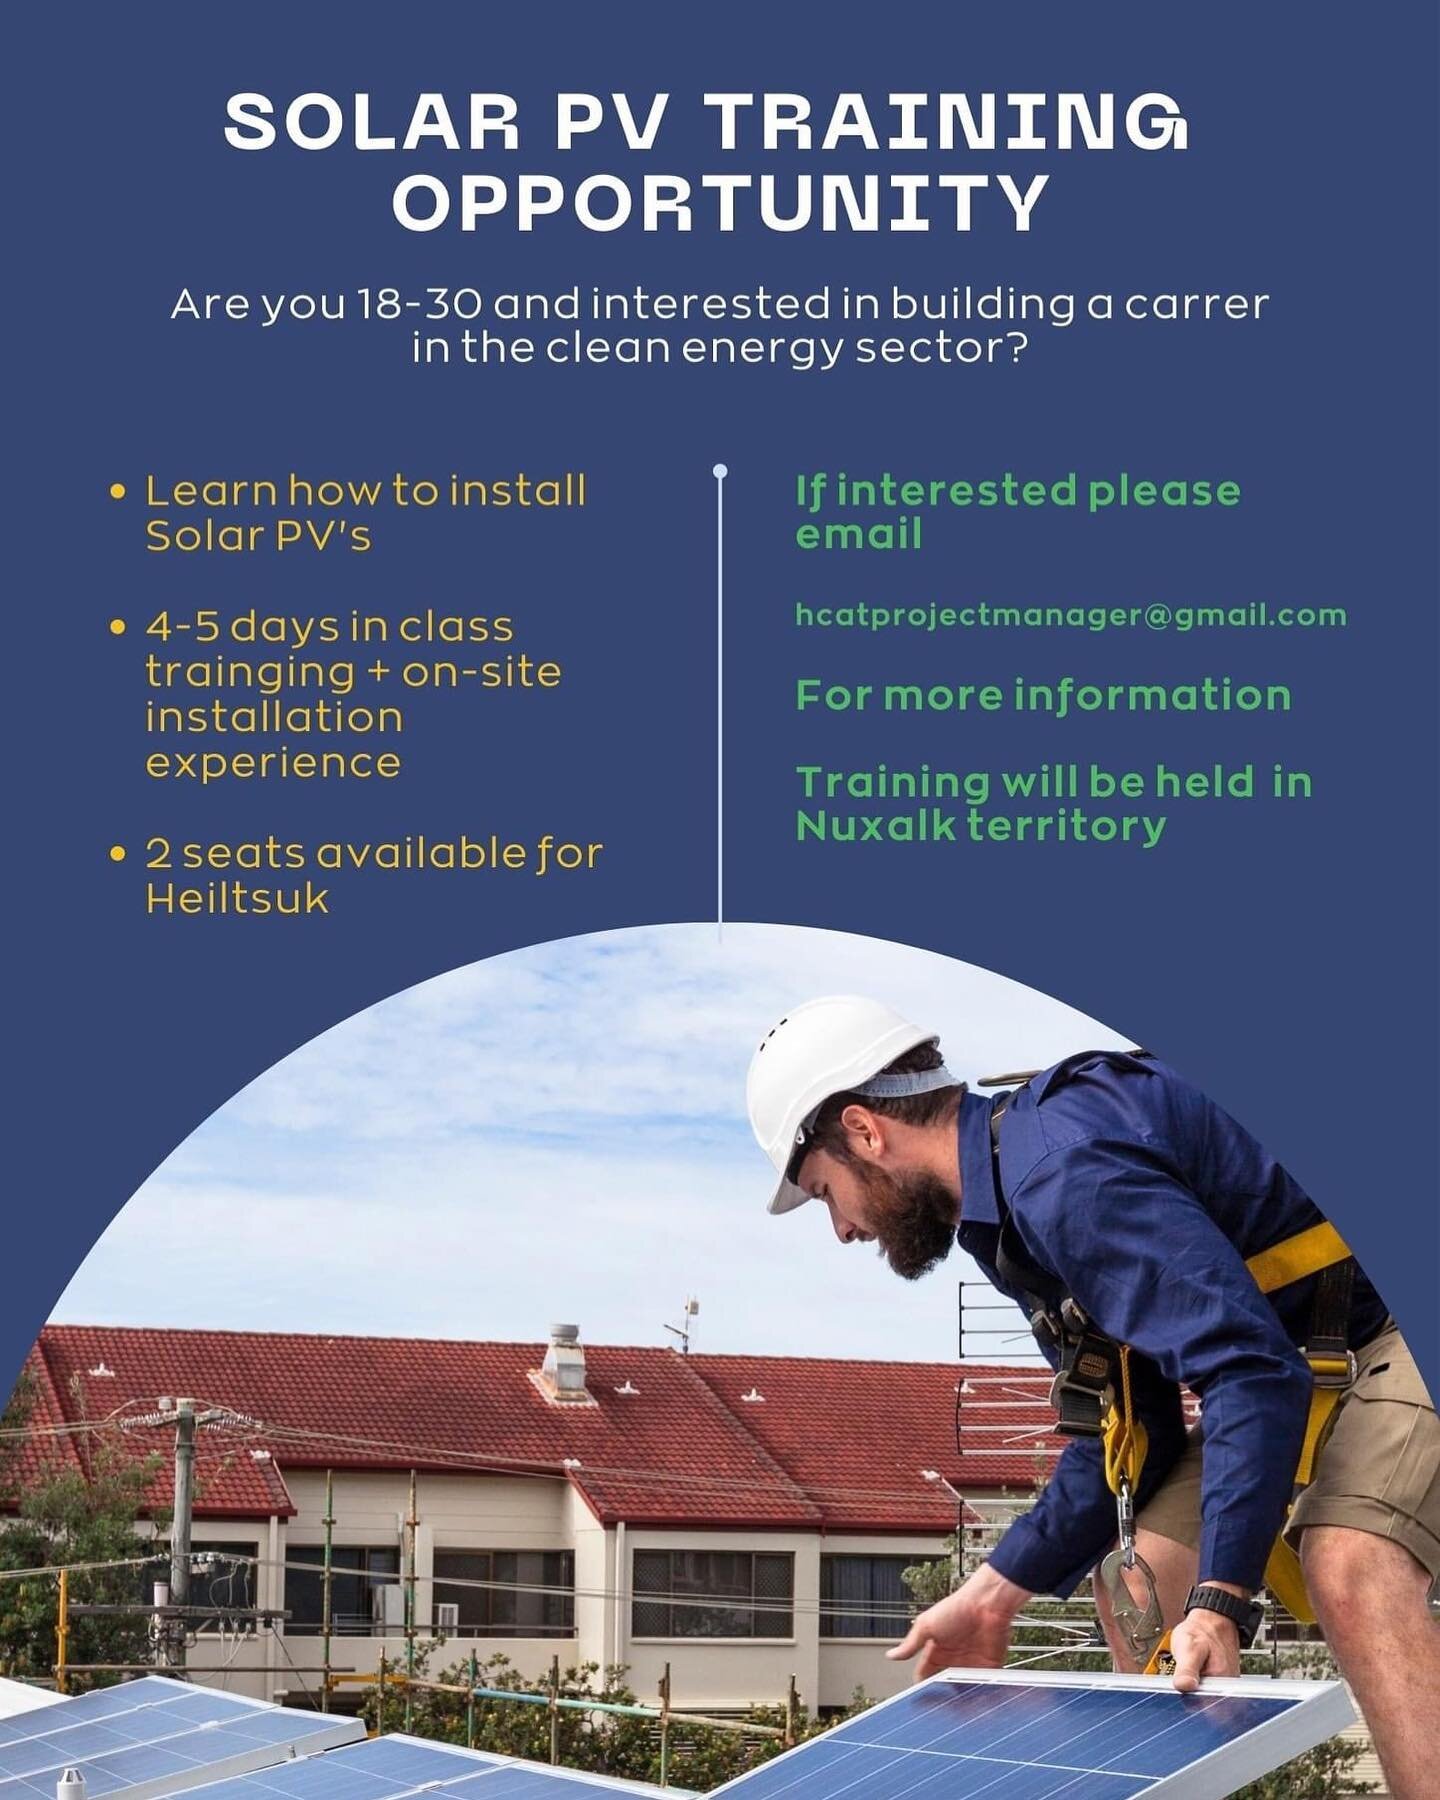 Exciting opportunity to learn how to install solar pv's. 

Are you 18-30 and interested?

Email hcatprojectmanager@gmail.com for more information.